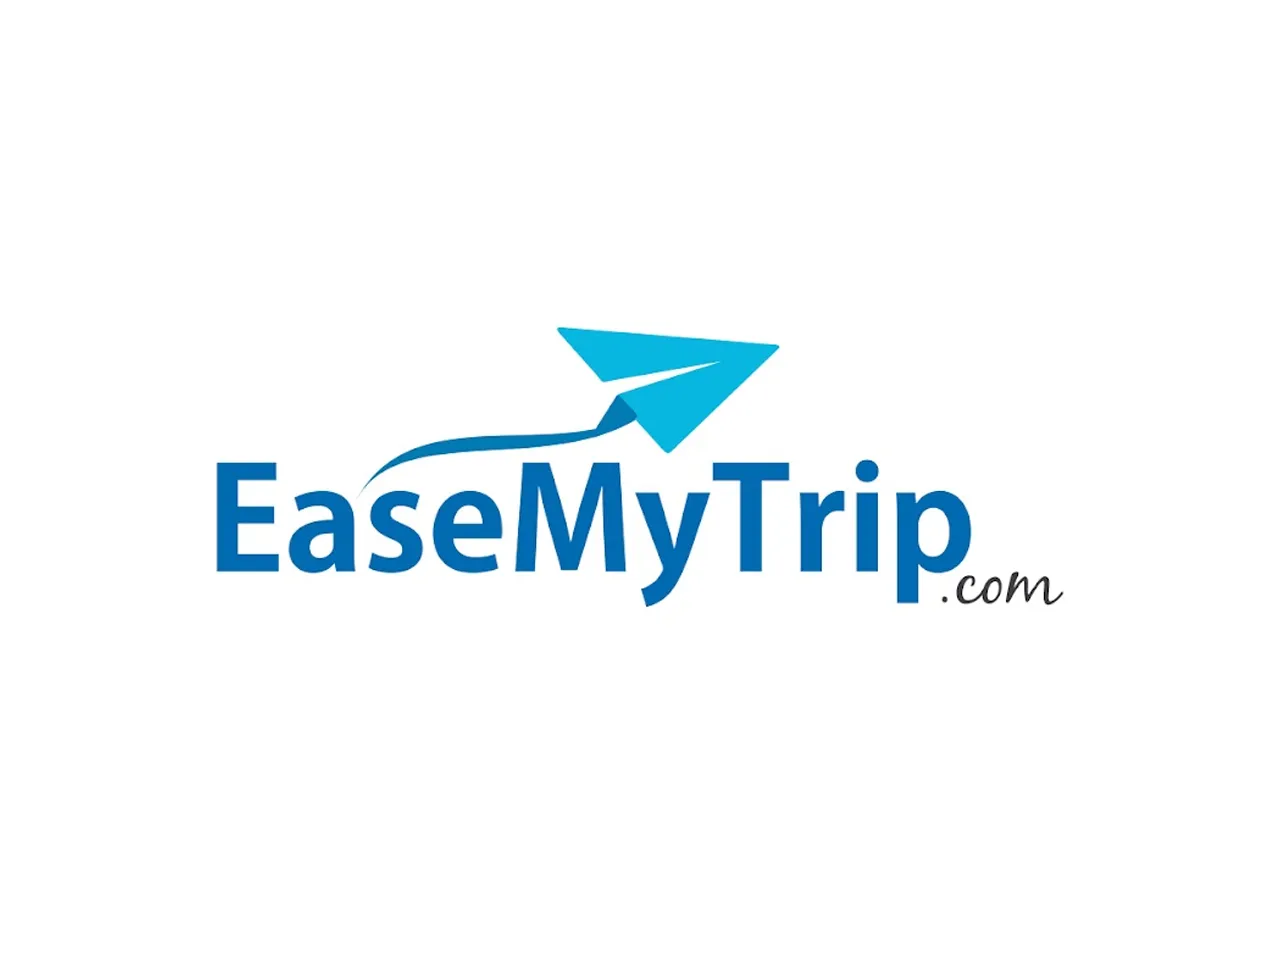 EaseMyTrip signs a MoU with the Ministry of Rural Development to empower Women members in 800 districts